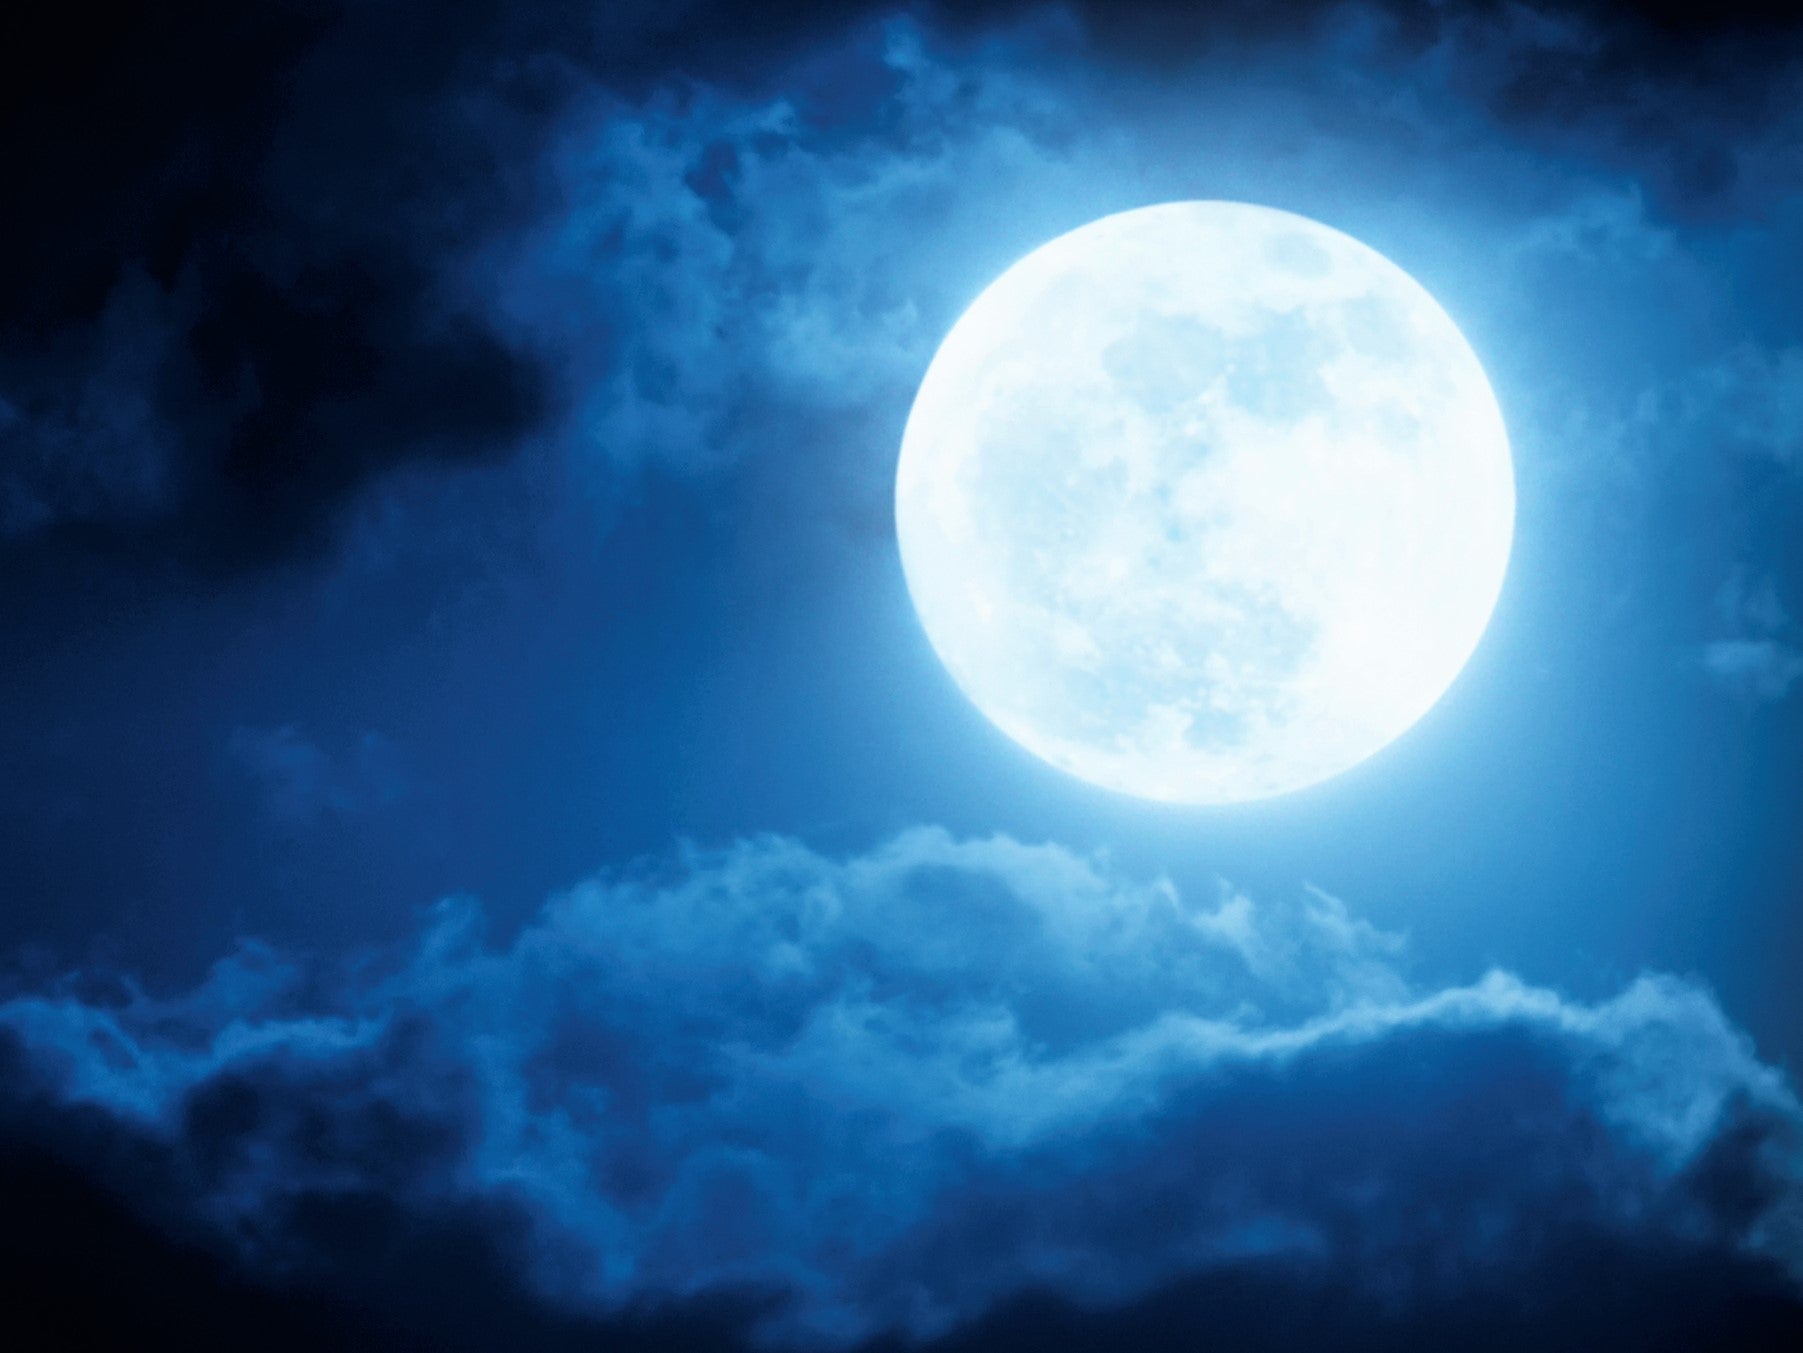 December’s full moon is known as the Cold Moon and Wolf Moon